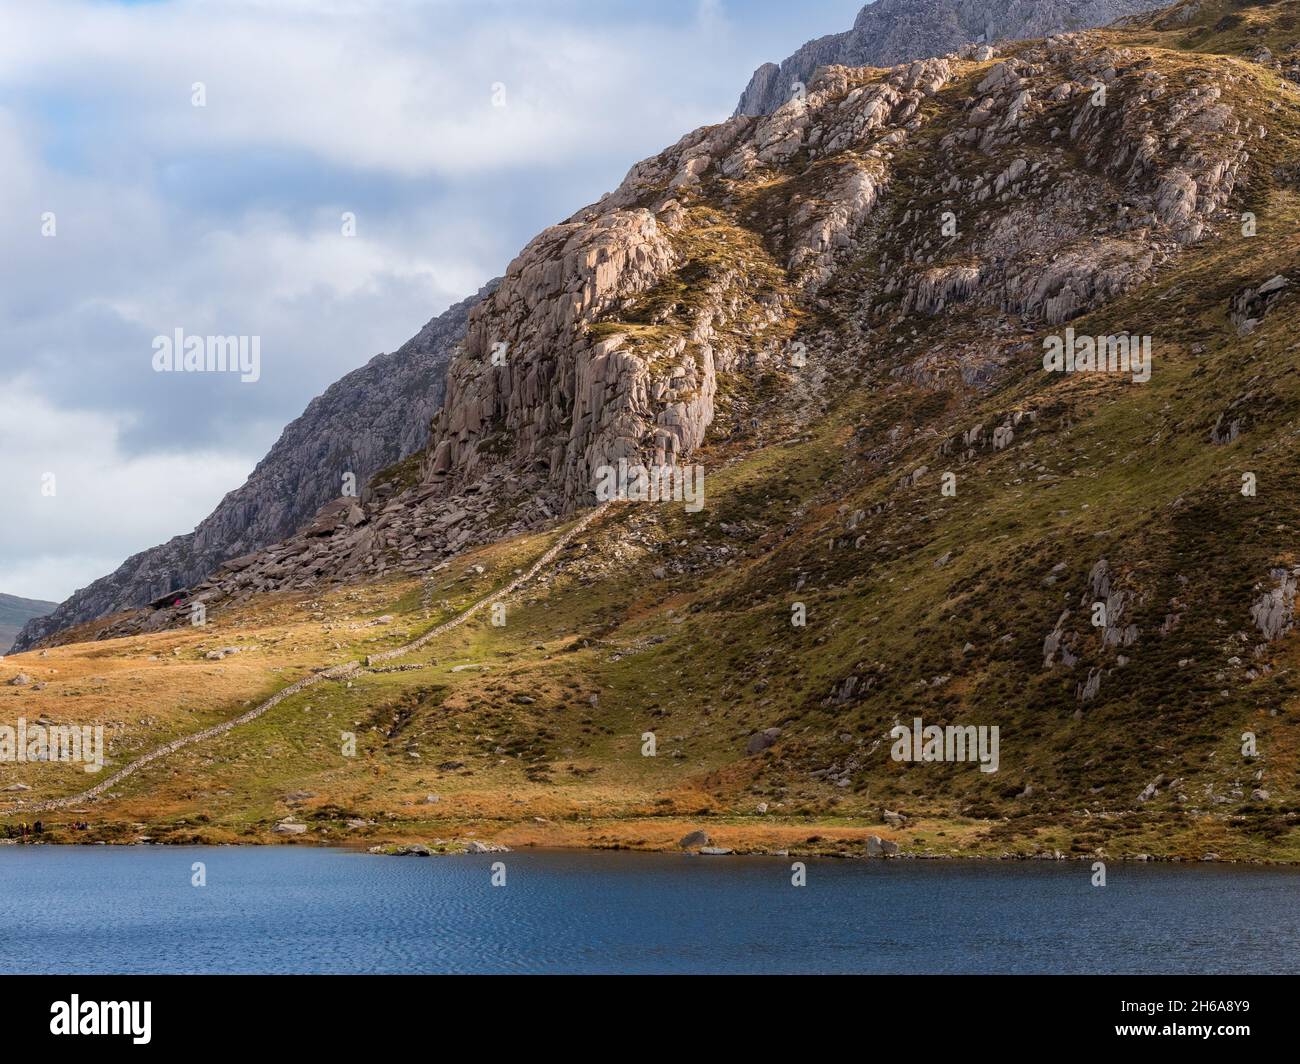 A beautiful mountainside bathed in autumn sunlight above a lake in Snowdonia, Wales Stock Photo